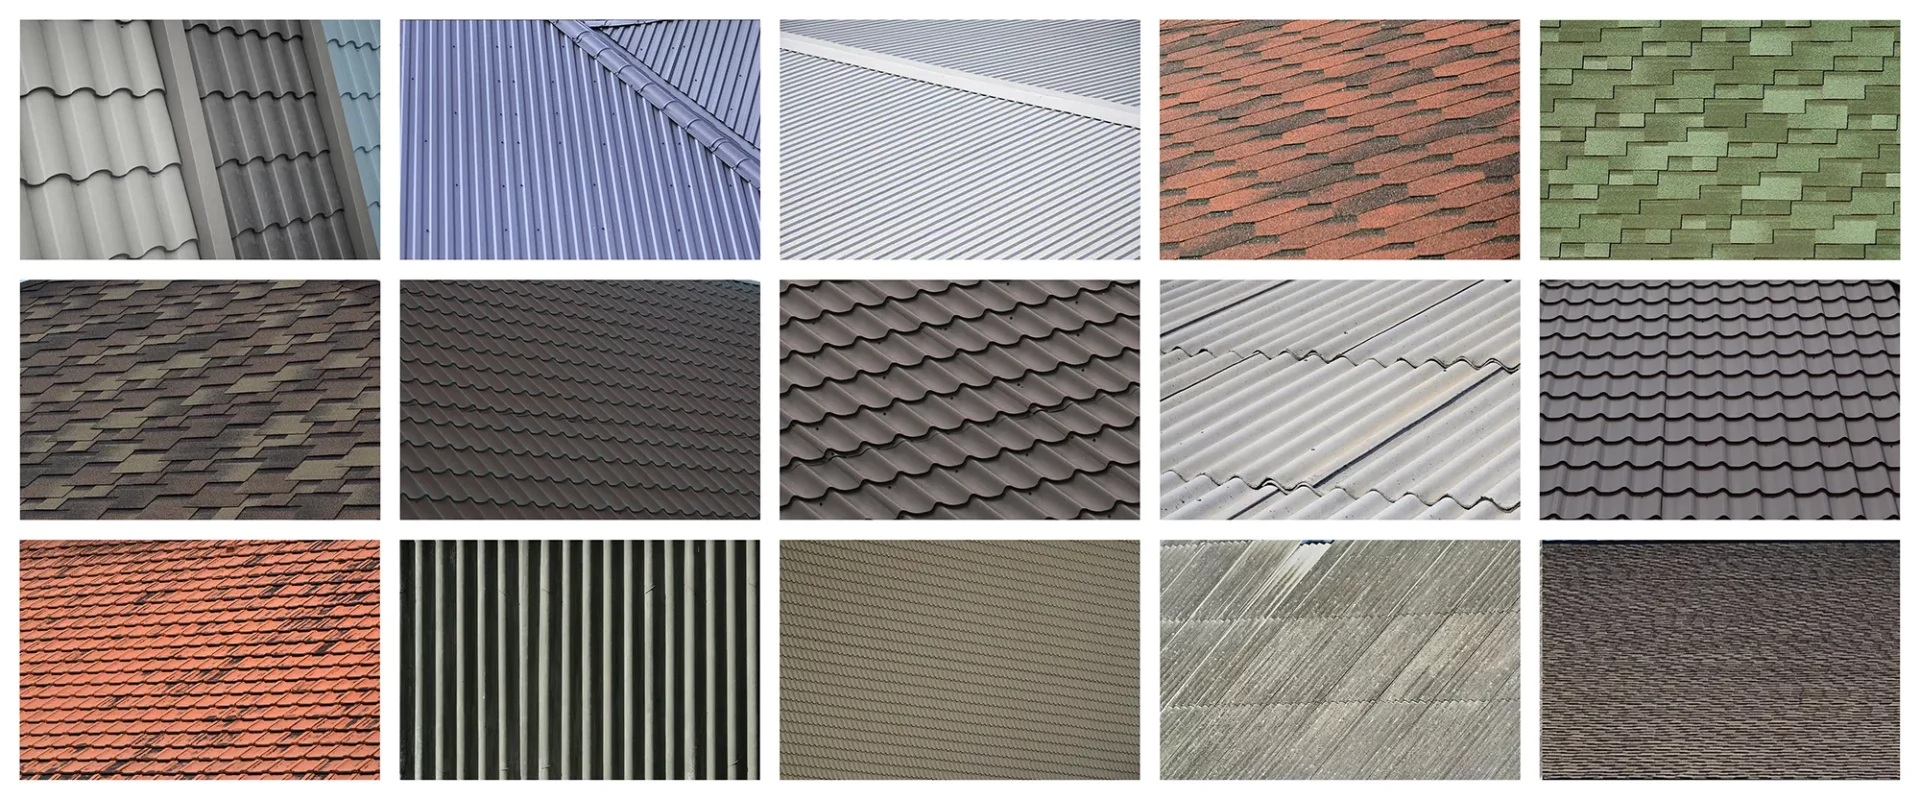 Top Roofing Materials for Tampa Bay